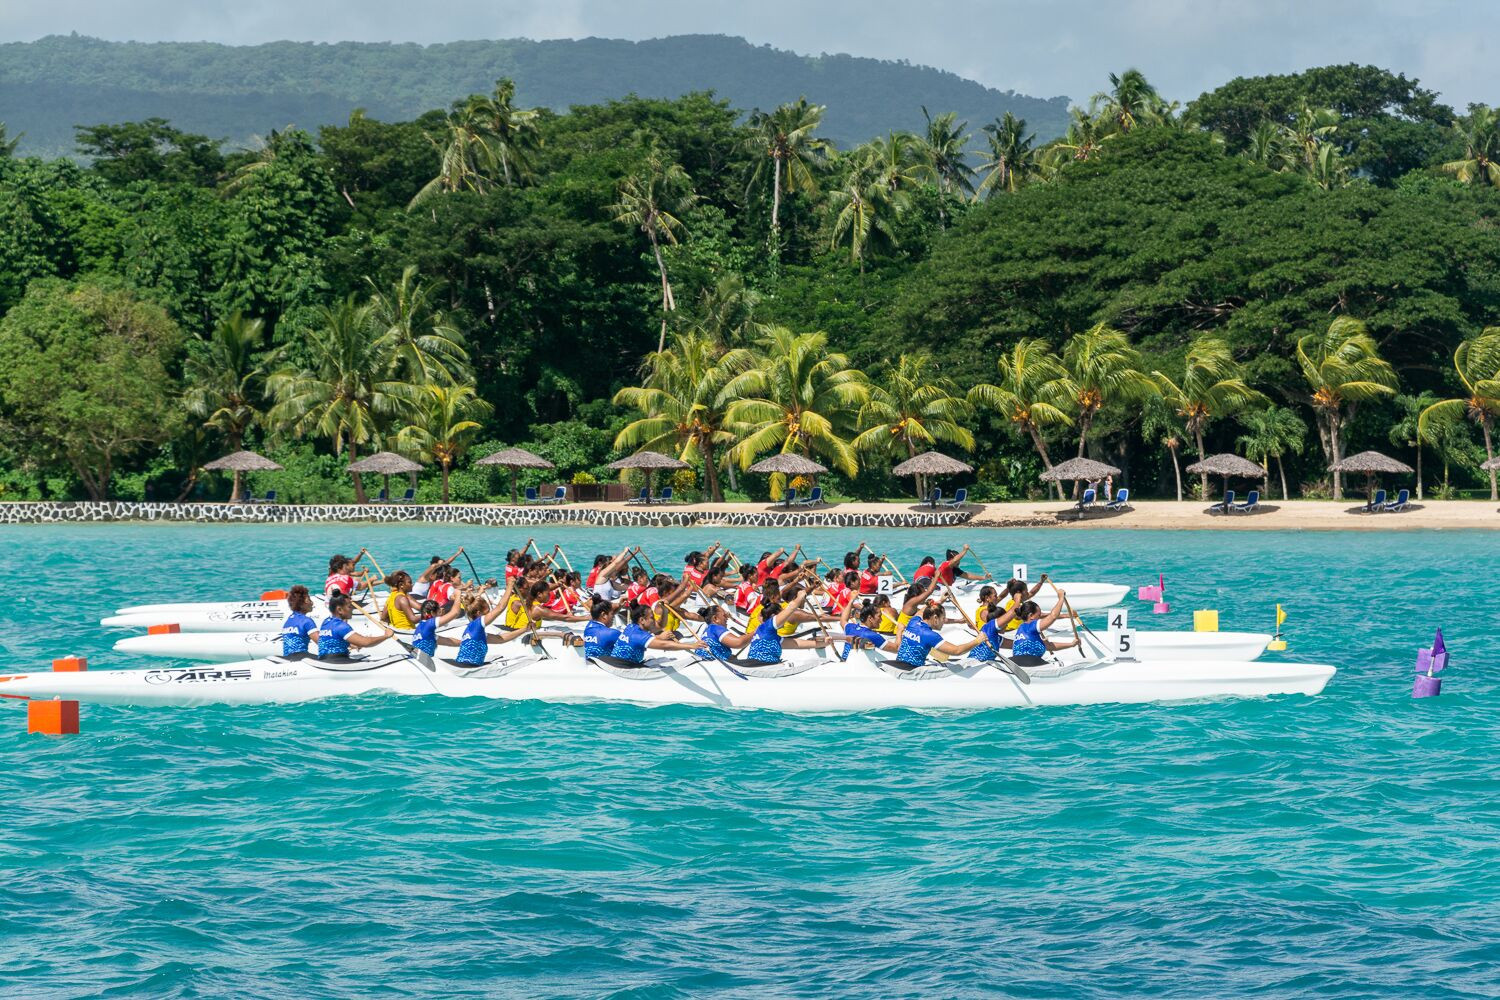 Competition took place in idyllic conditions on Apia's waterfront ©Pacific Games News Service